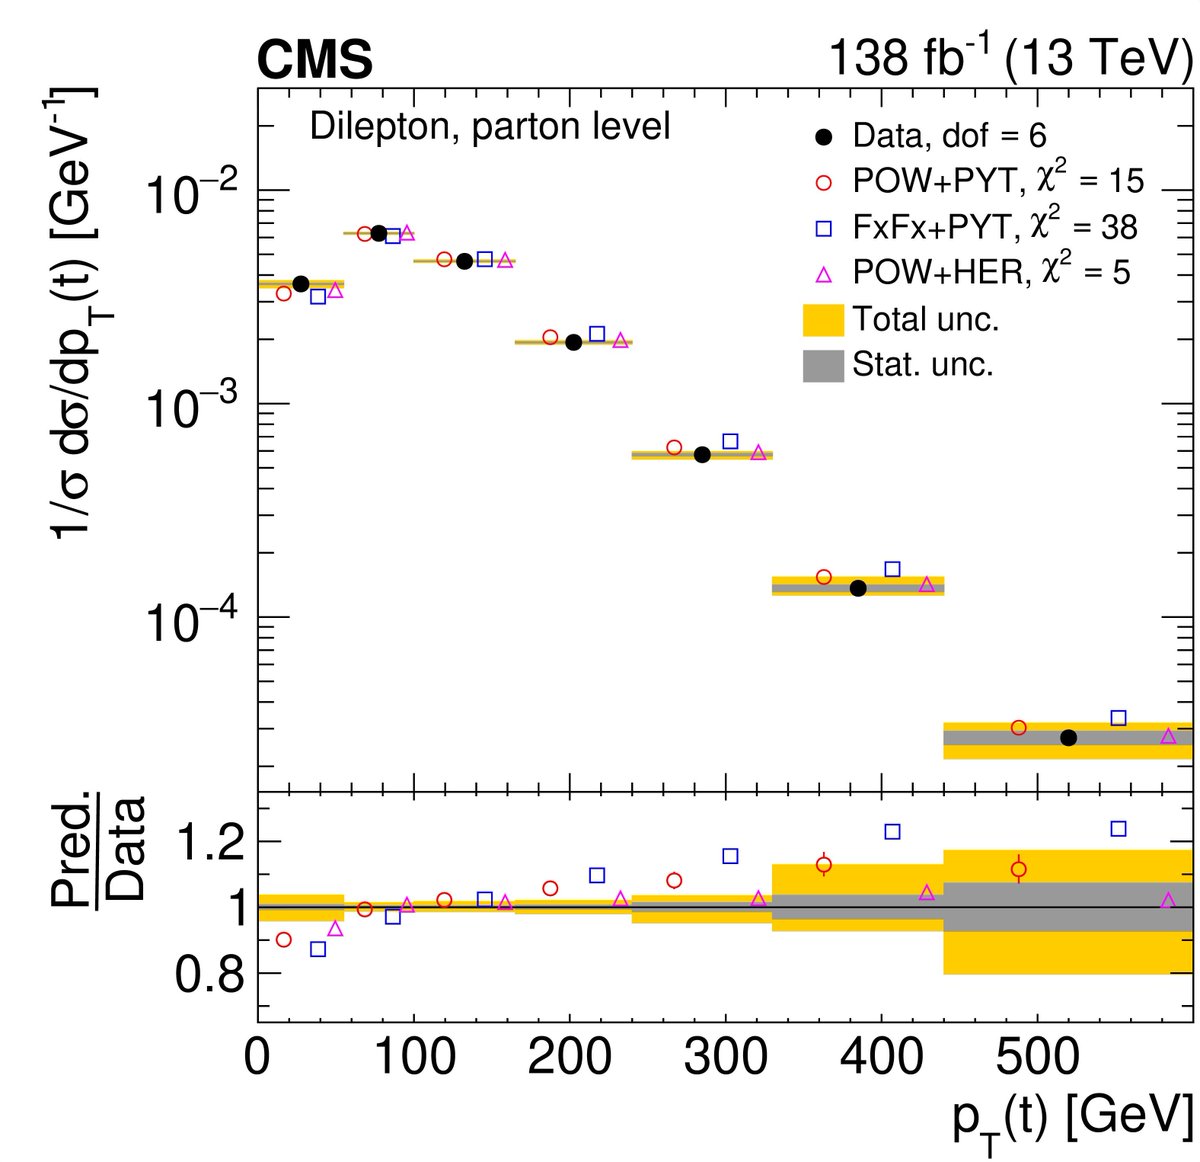 #CMSPaper 1275 measures top quark pair production in great detail (and versus various observables). This is important to improve simulations and analytical calculations when those are more precise, more subtle deviation scenarios can be tested buff.ly/3VCoBhN